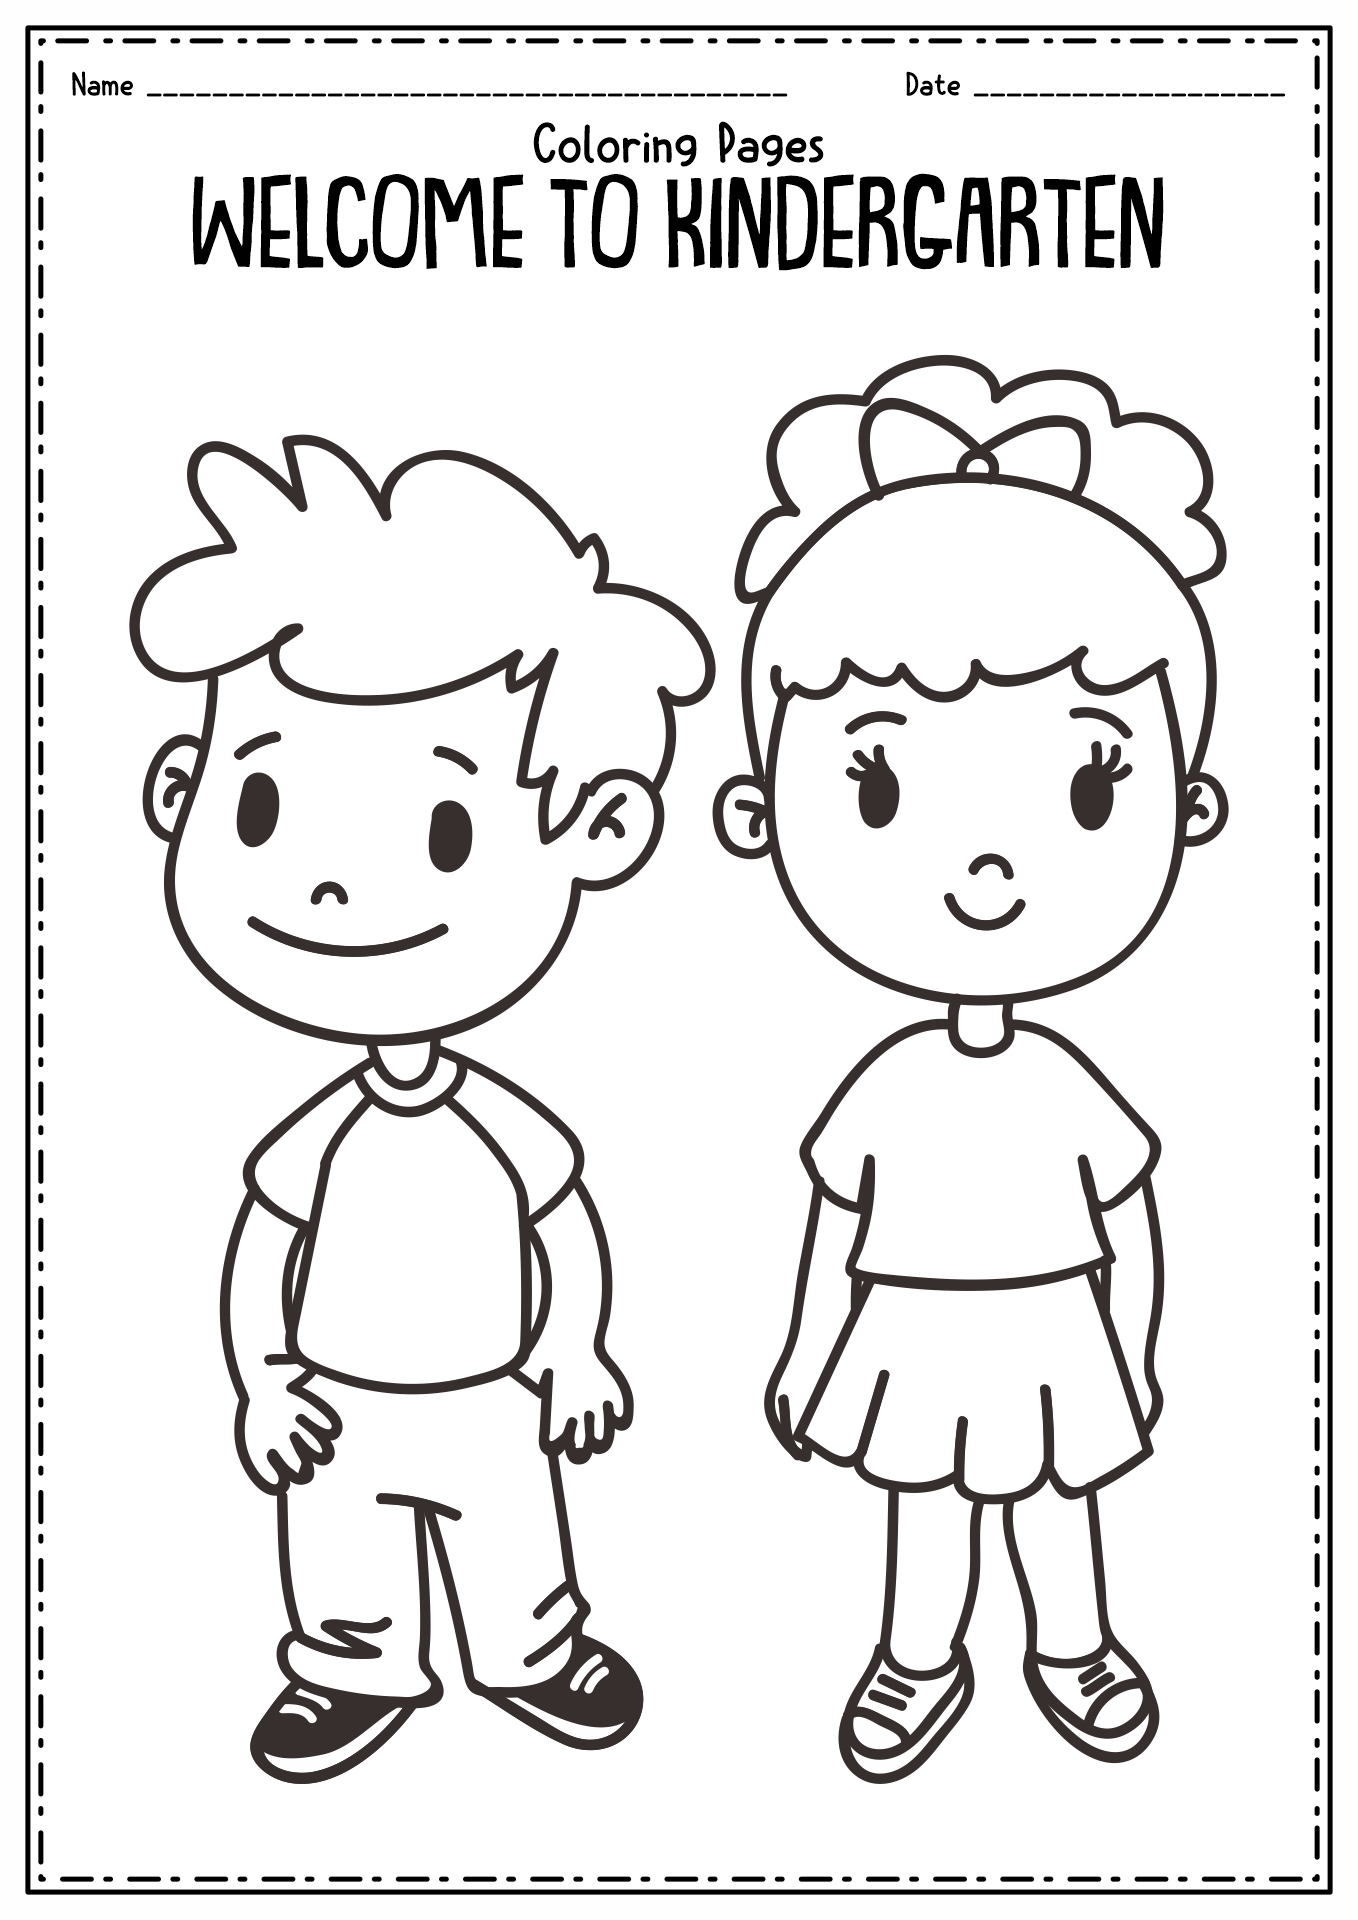 11-best-images-of-first-day-of-kindergarten-school-worksheets-first